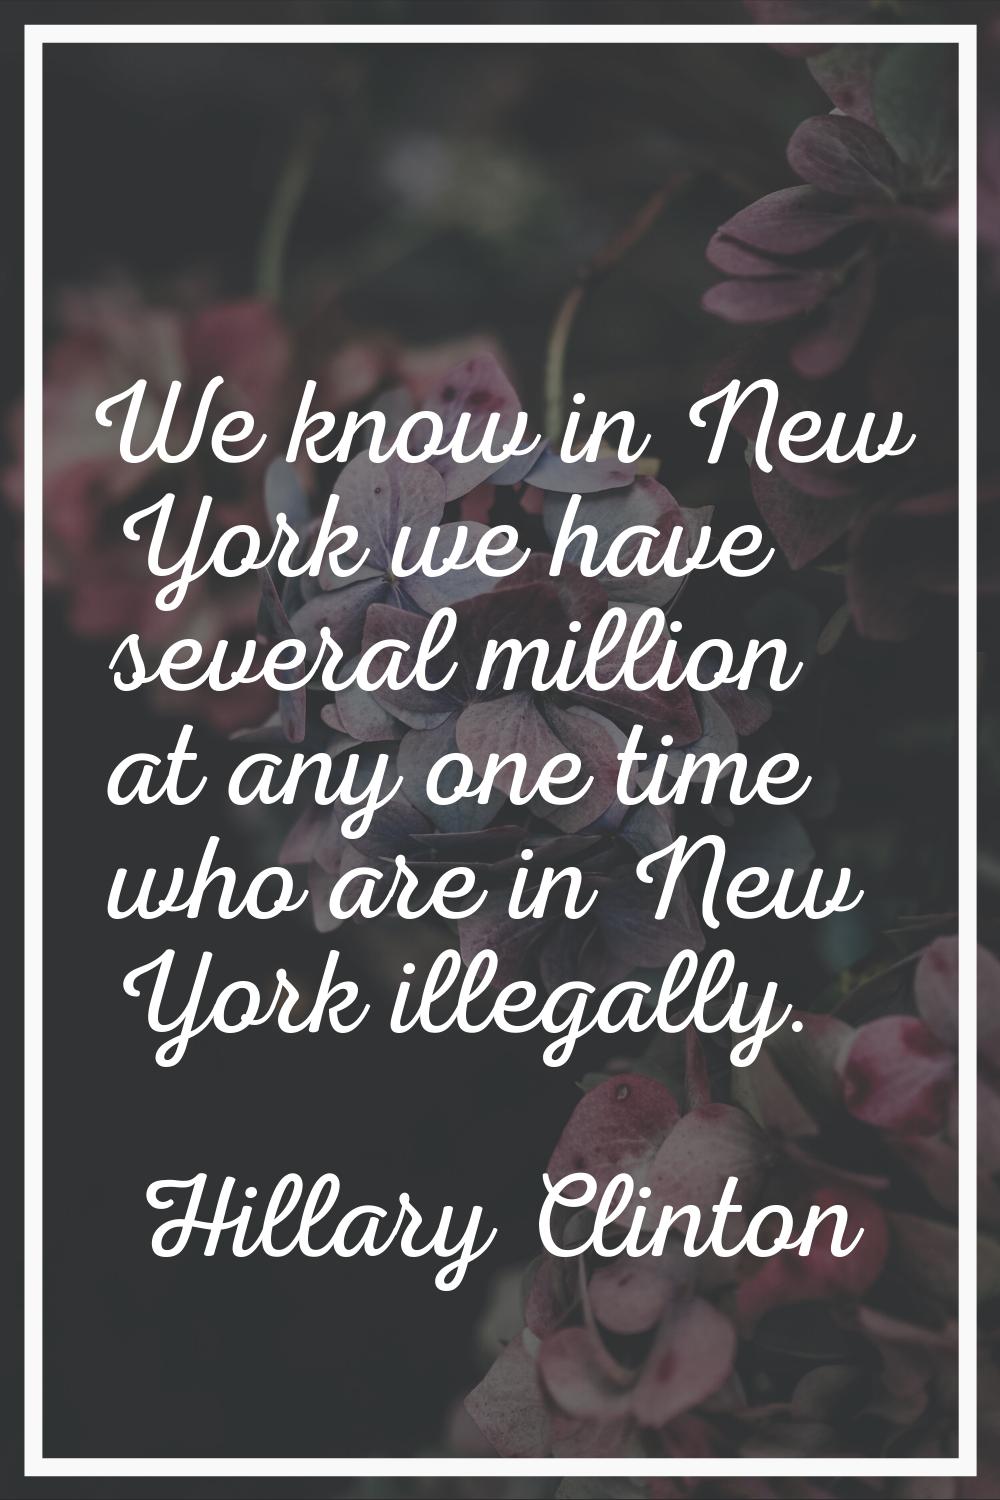 We know in New York we have several million at any one time who are in New York illegally.